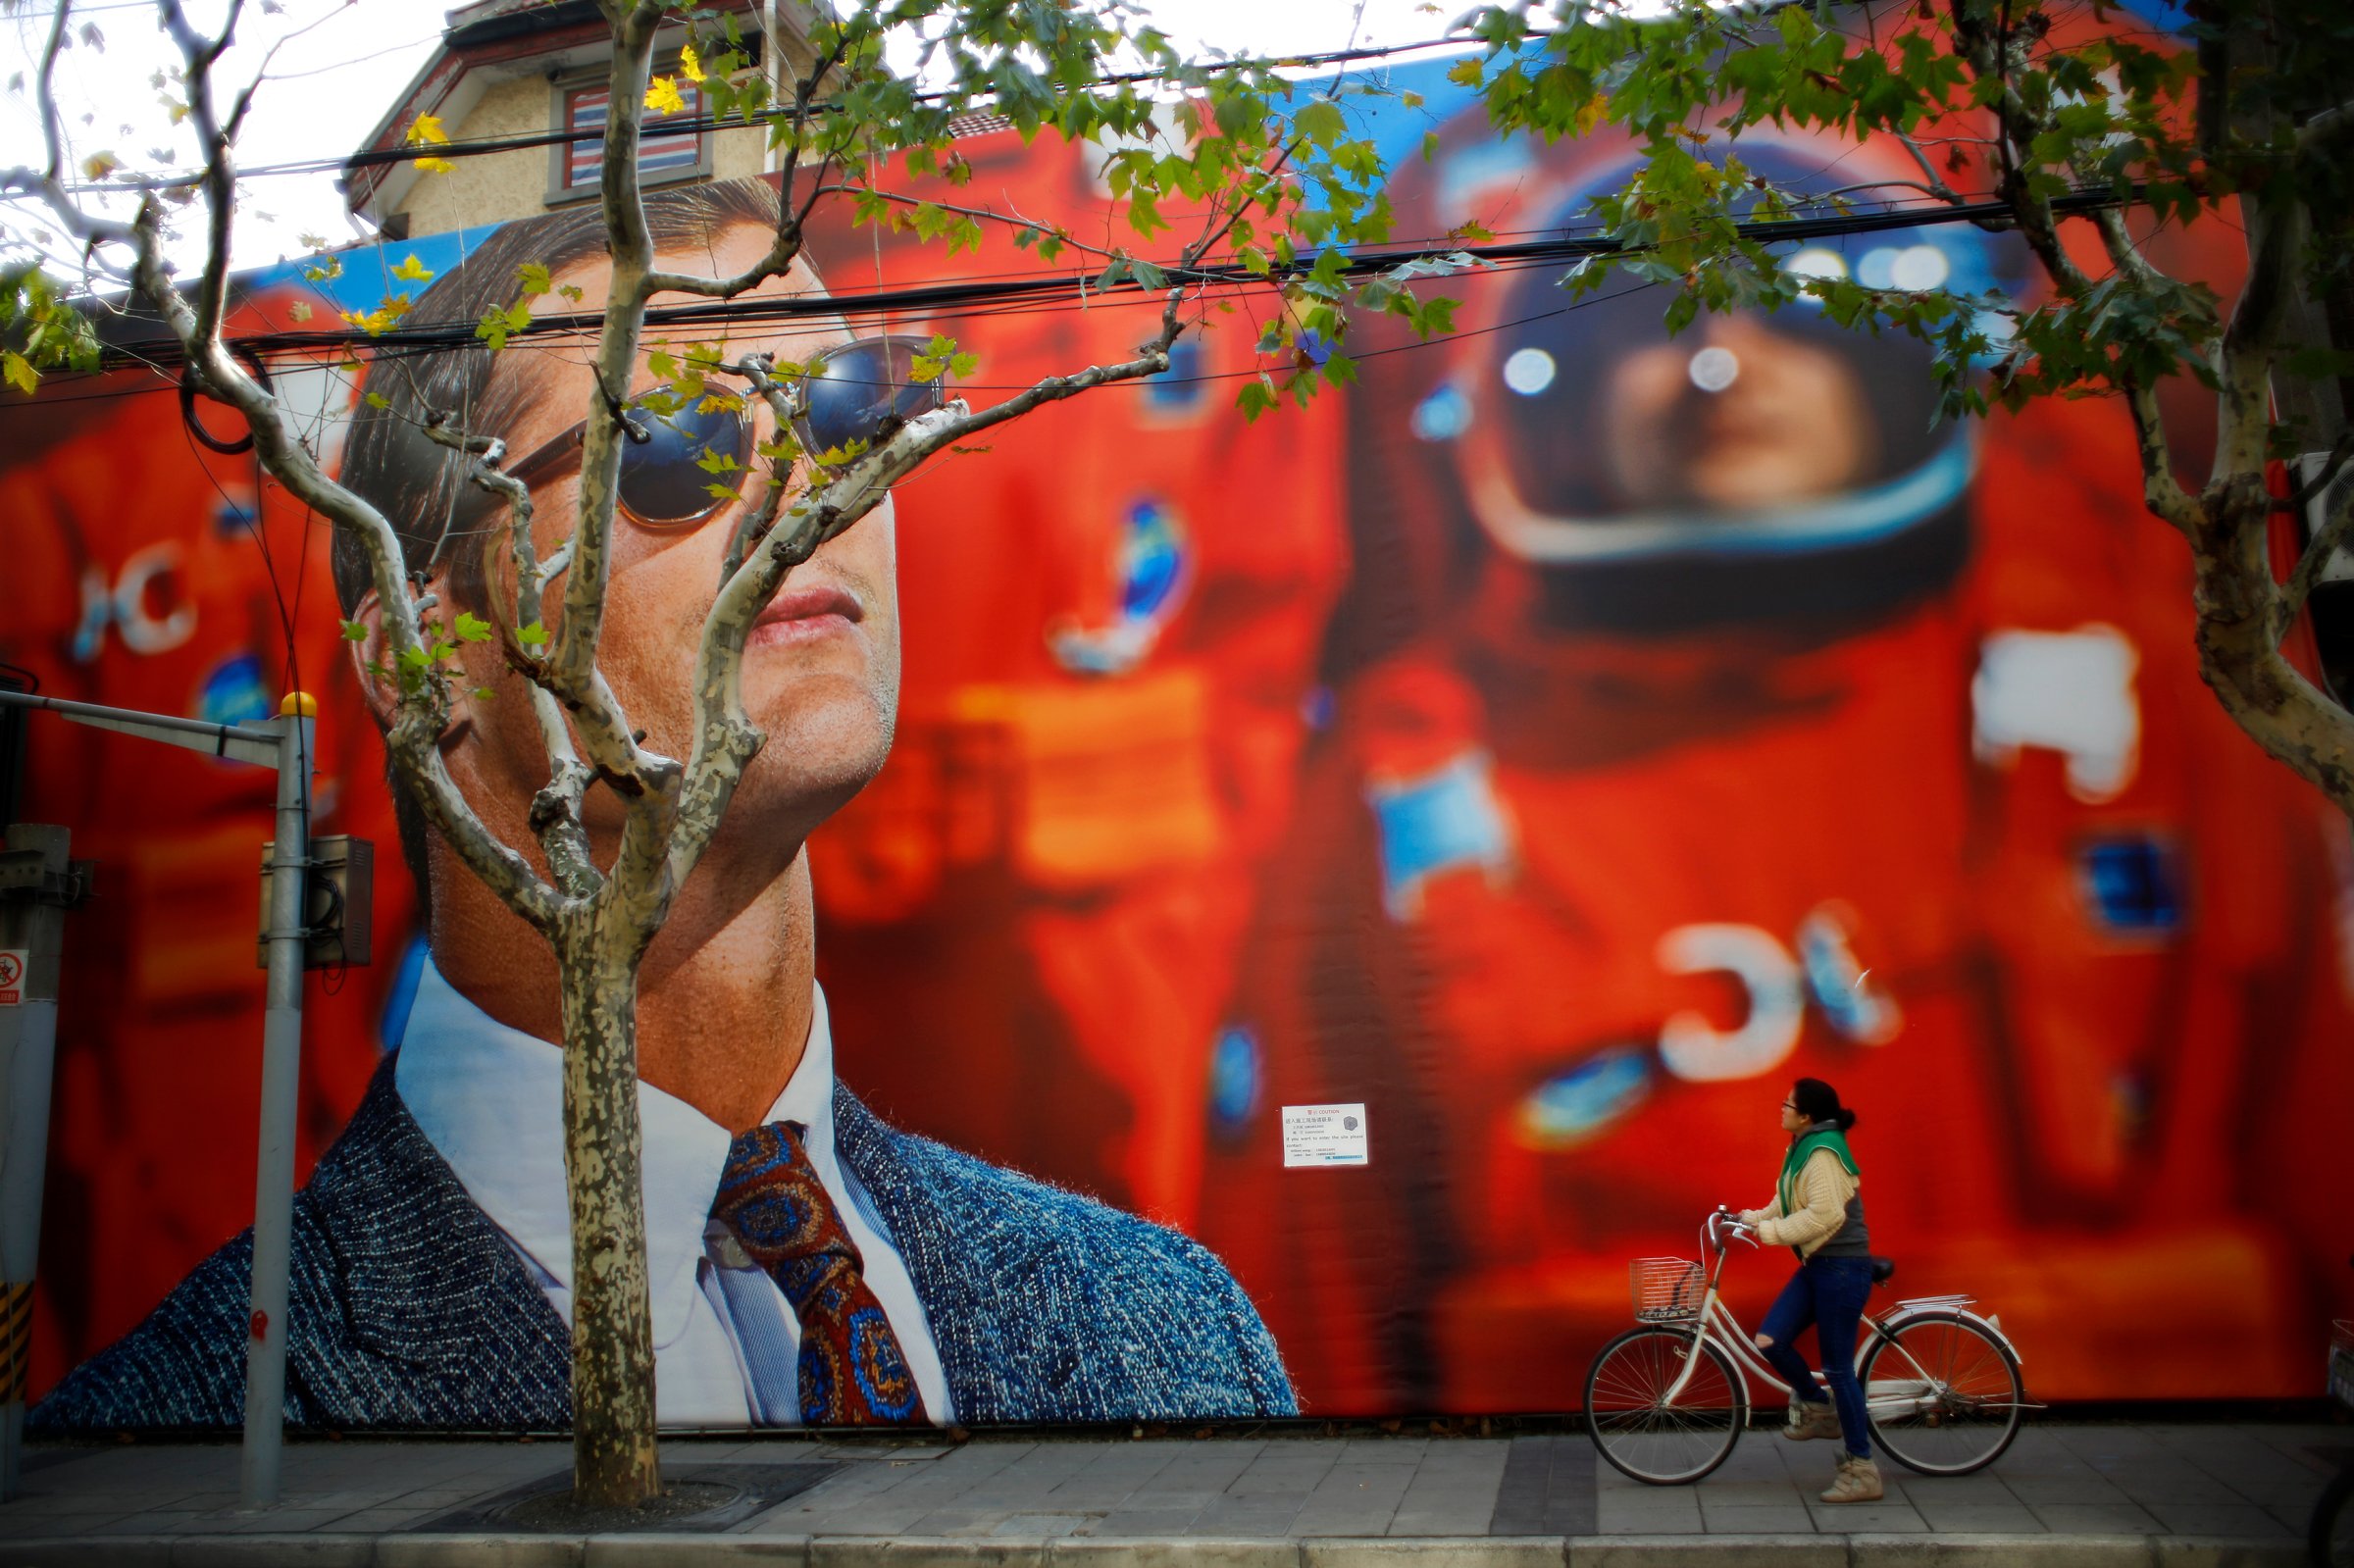 A woman looks at a giant billboard for a clothing shop, as she rides her bike along a street in downtown Shanghai